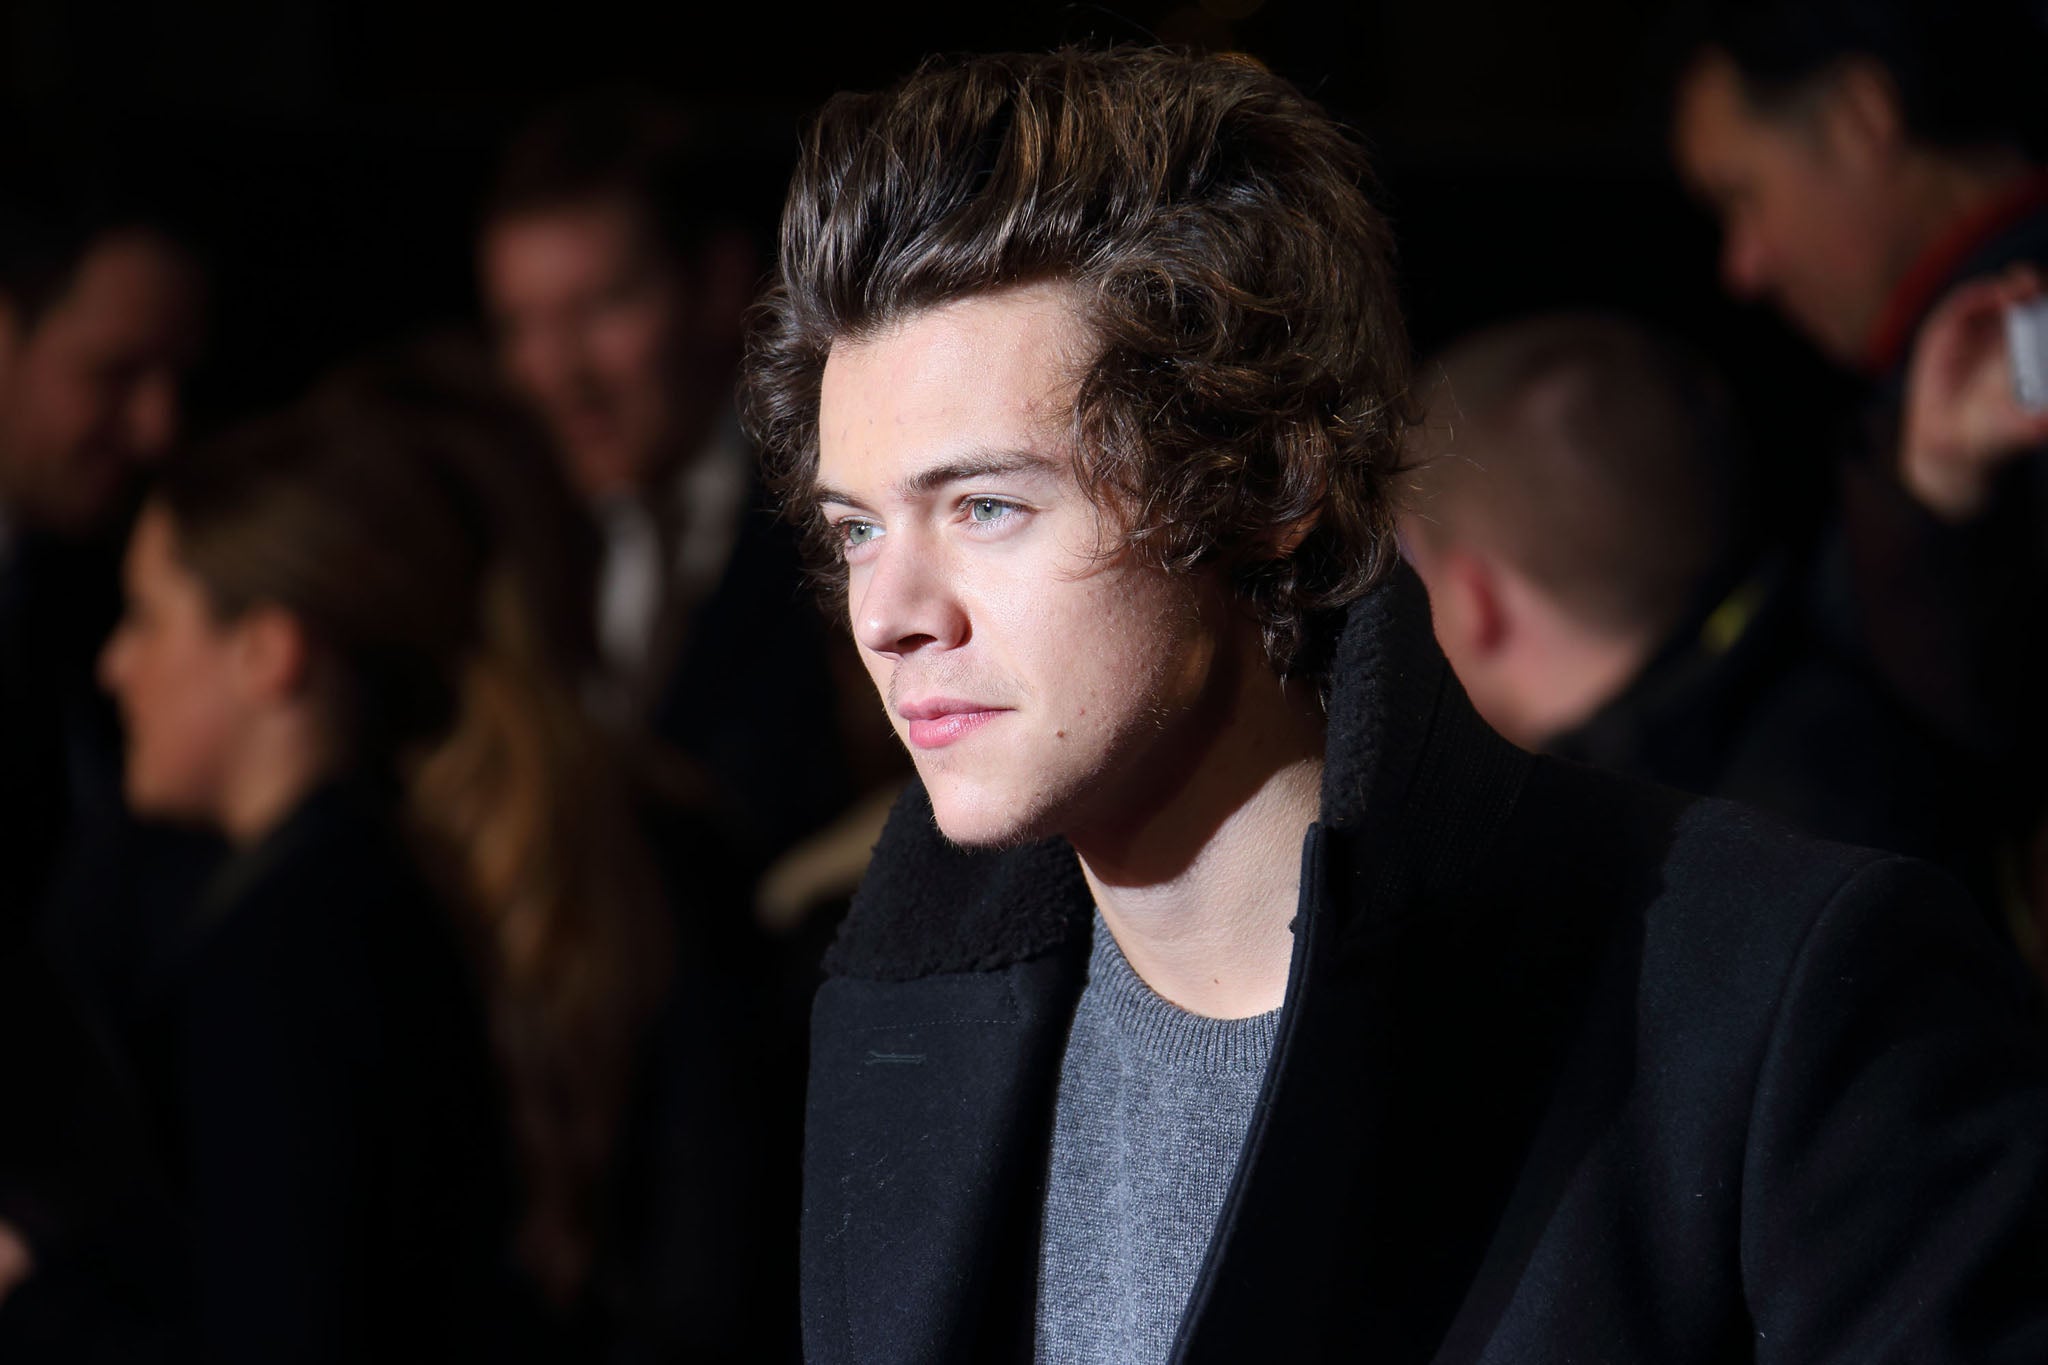 Harry Styles has won a court order to prevent the paparazzi from harassing him.